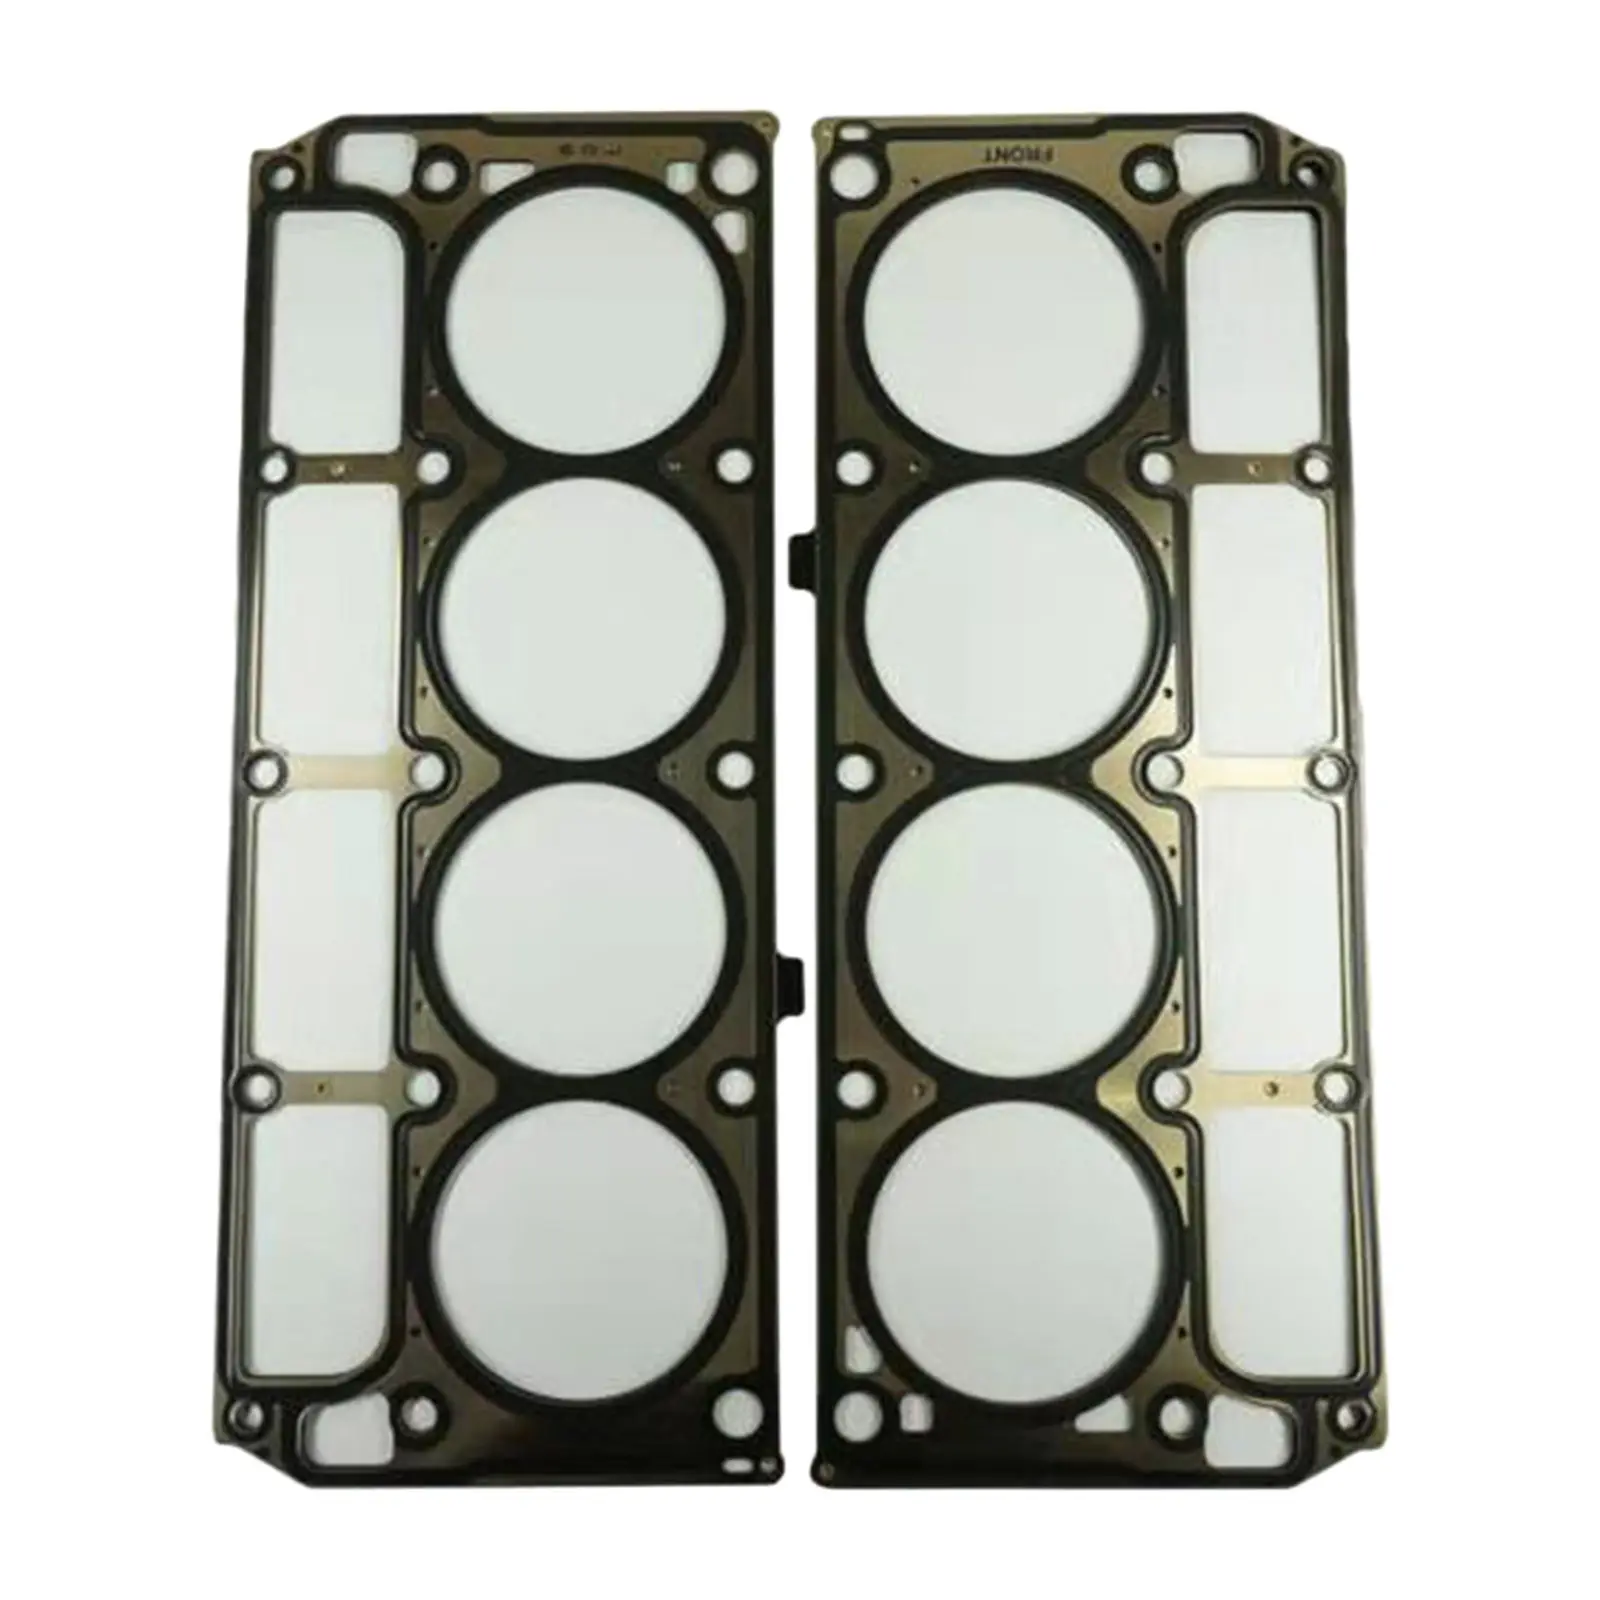 Automobile LS9 Cylinder Head Gaskets 12622033 Multiple Layer Gaskets Set Fit for Cadillac CTS 6.0 6.2 09-15 Btr22033